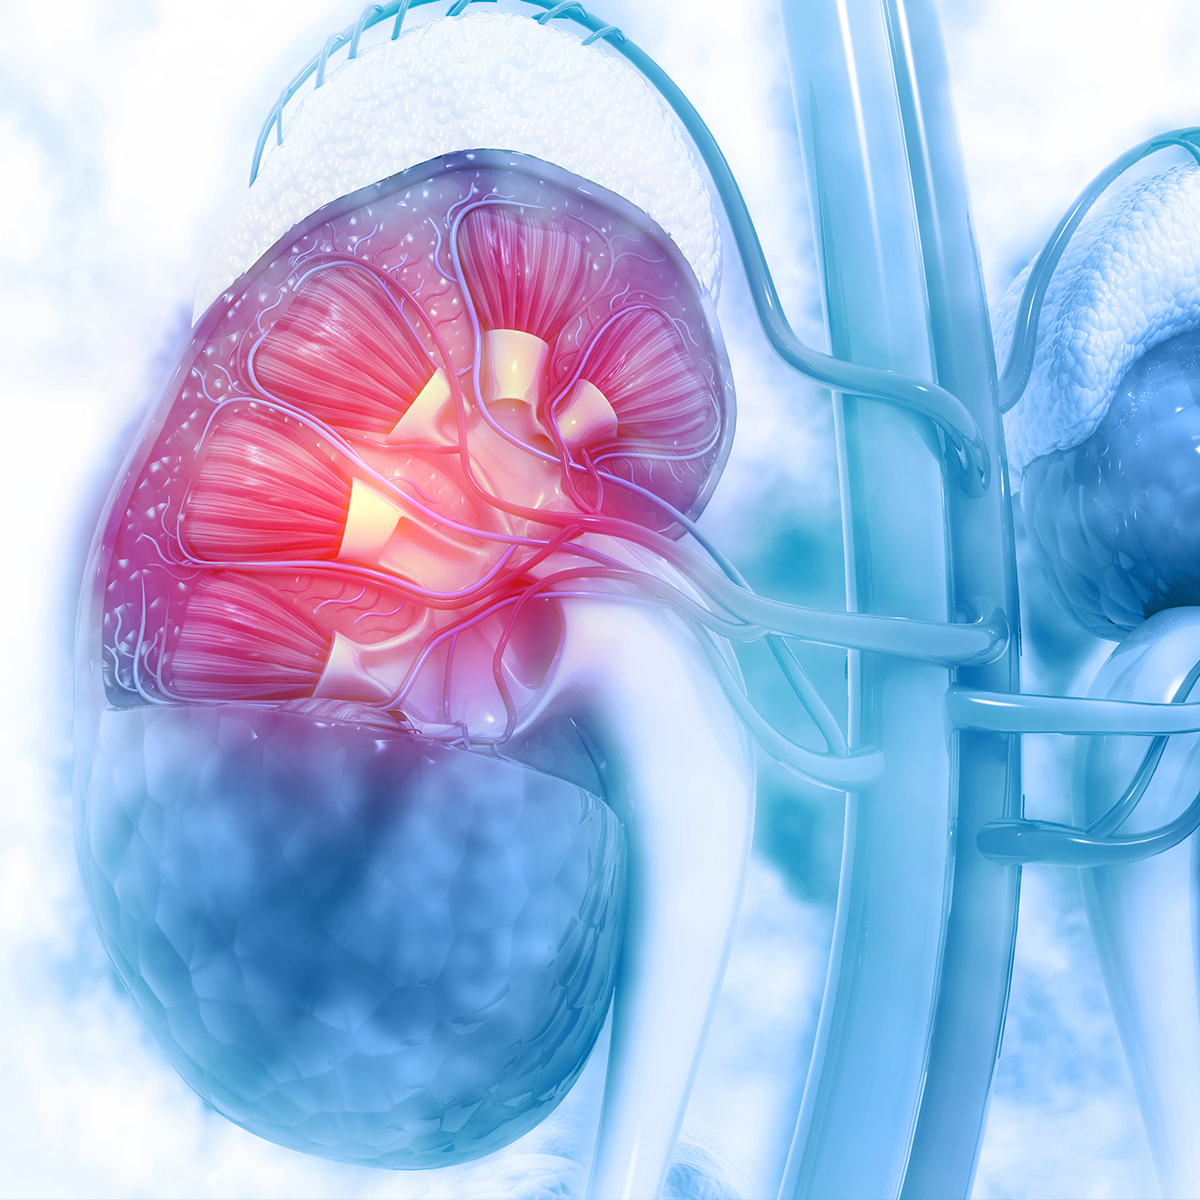 Patients with advanced renal cell carcinoma reported improved health-related quality of life, when treated with nivolumab plus cabozantinib, compared to treatment with sunitinib.